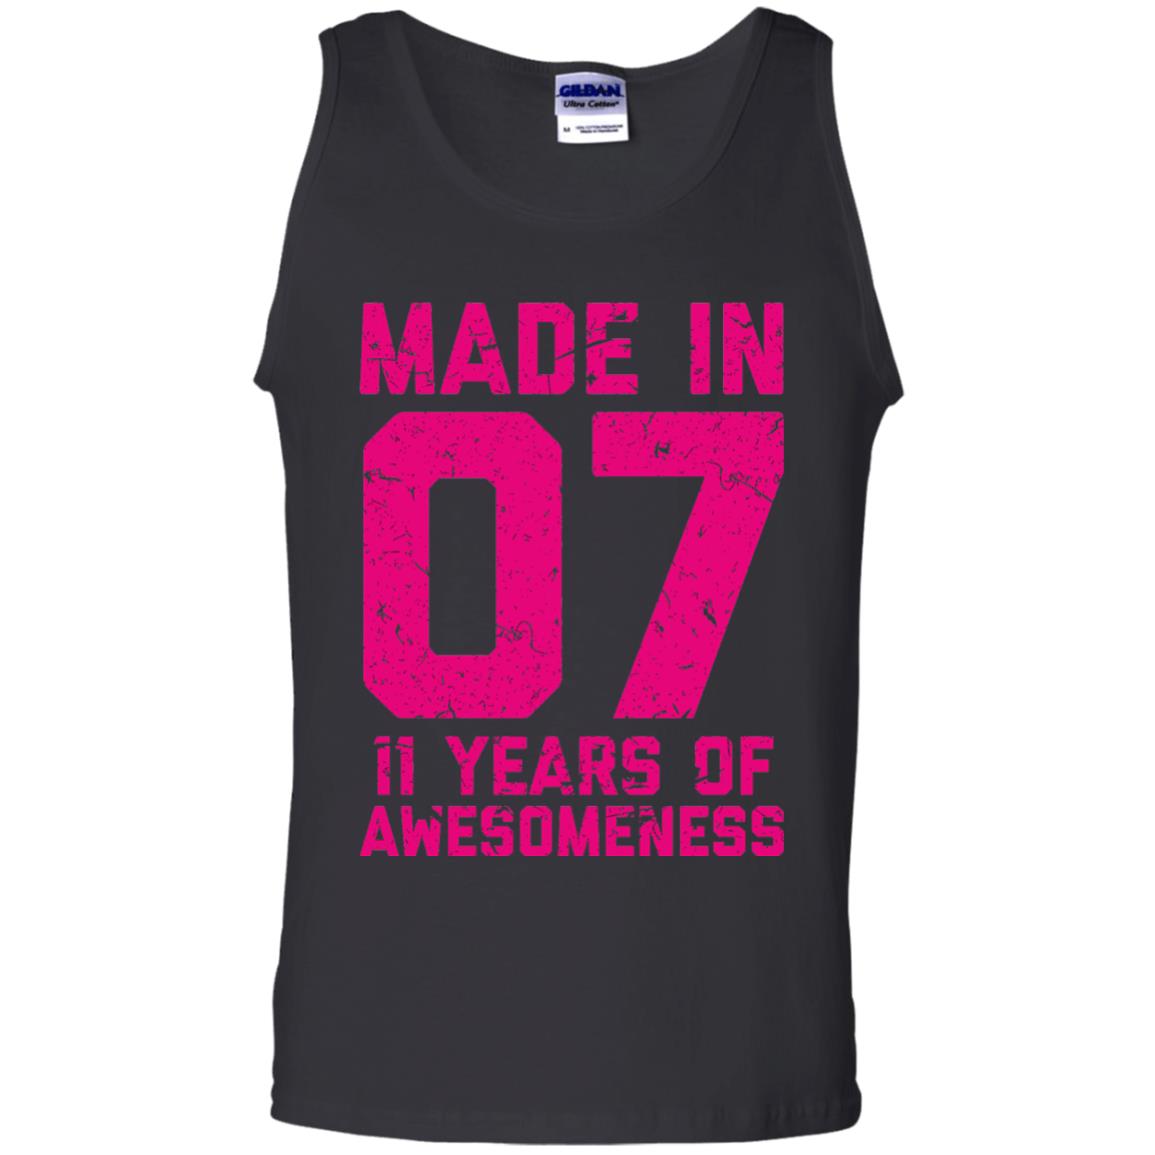 Made In 07 Age 11 Eleven Years Of Awesomeness T-shirt